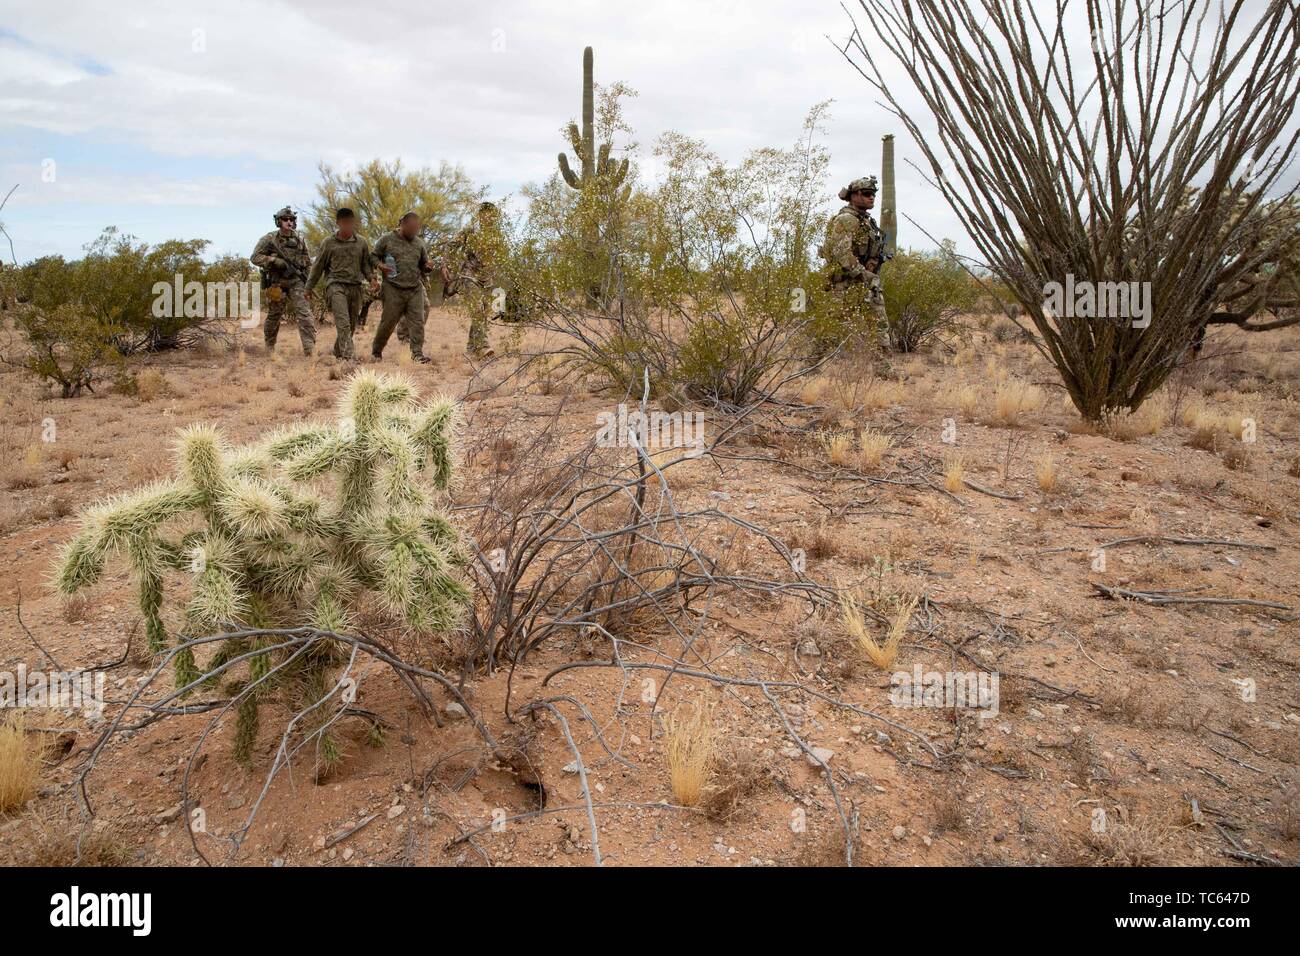 U.S. Border Patrol escort a group of illegal migrants to a Blackhawk helicopter after they were apprehended crossing from Mexico on the Tohono Oʼodham Indian Reservation May 22, 2019 near Pisinemo, Arizona. The faces are obscured by the Border Patrol to protect their identity. Stock Photo